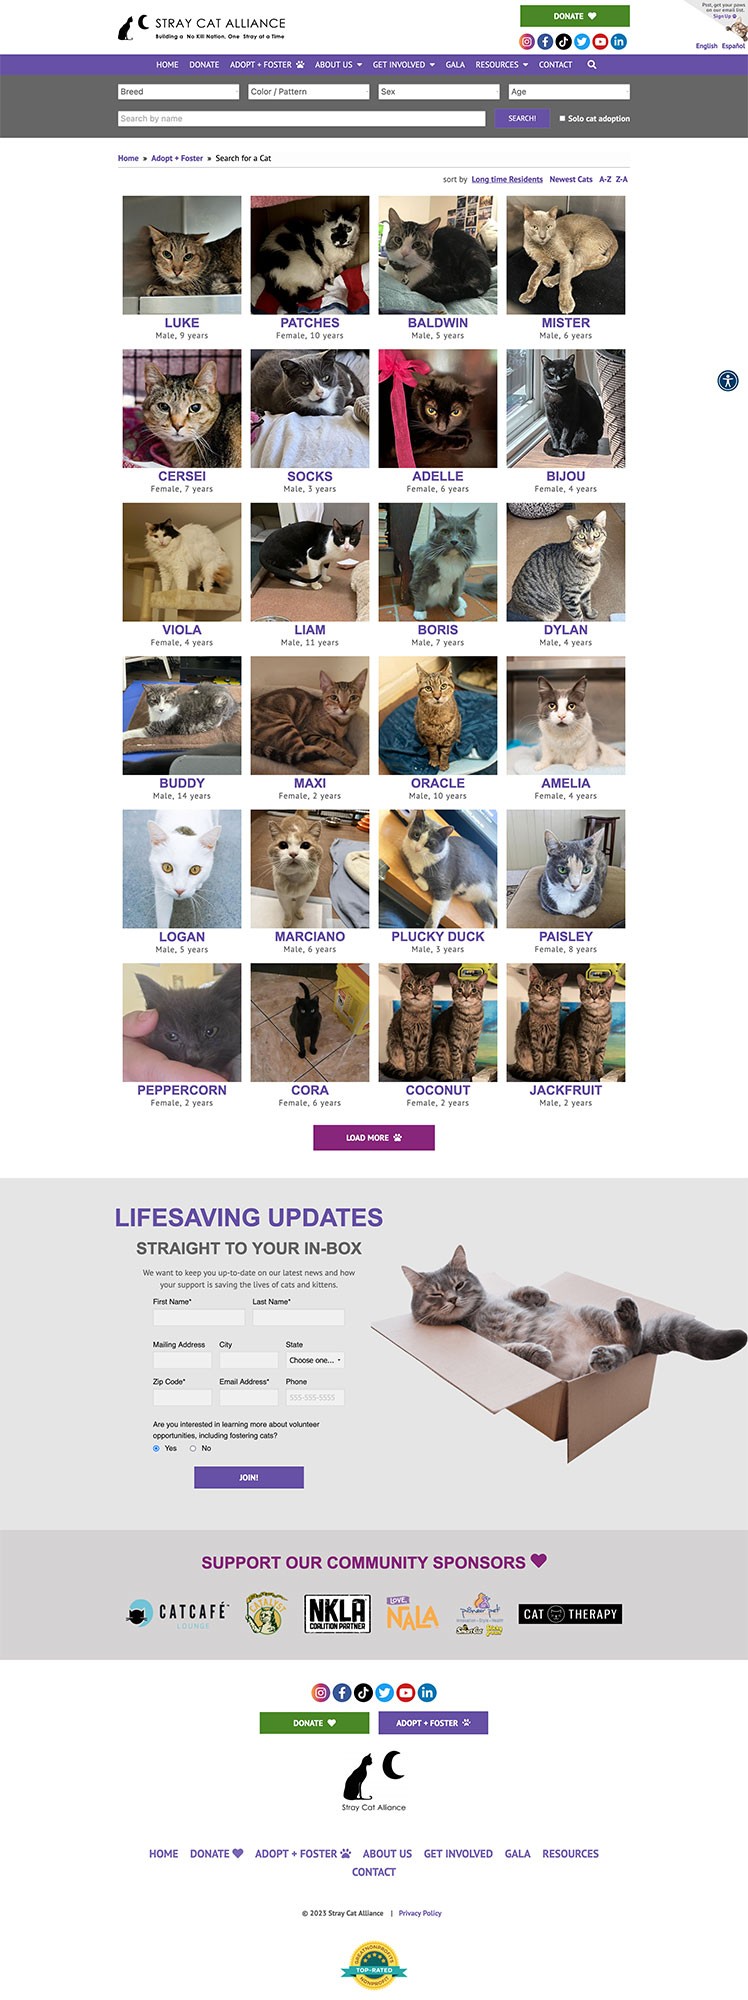 stray cat alliance search database